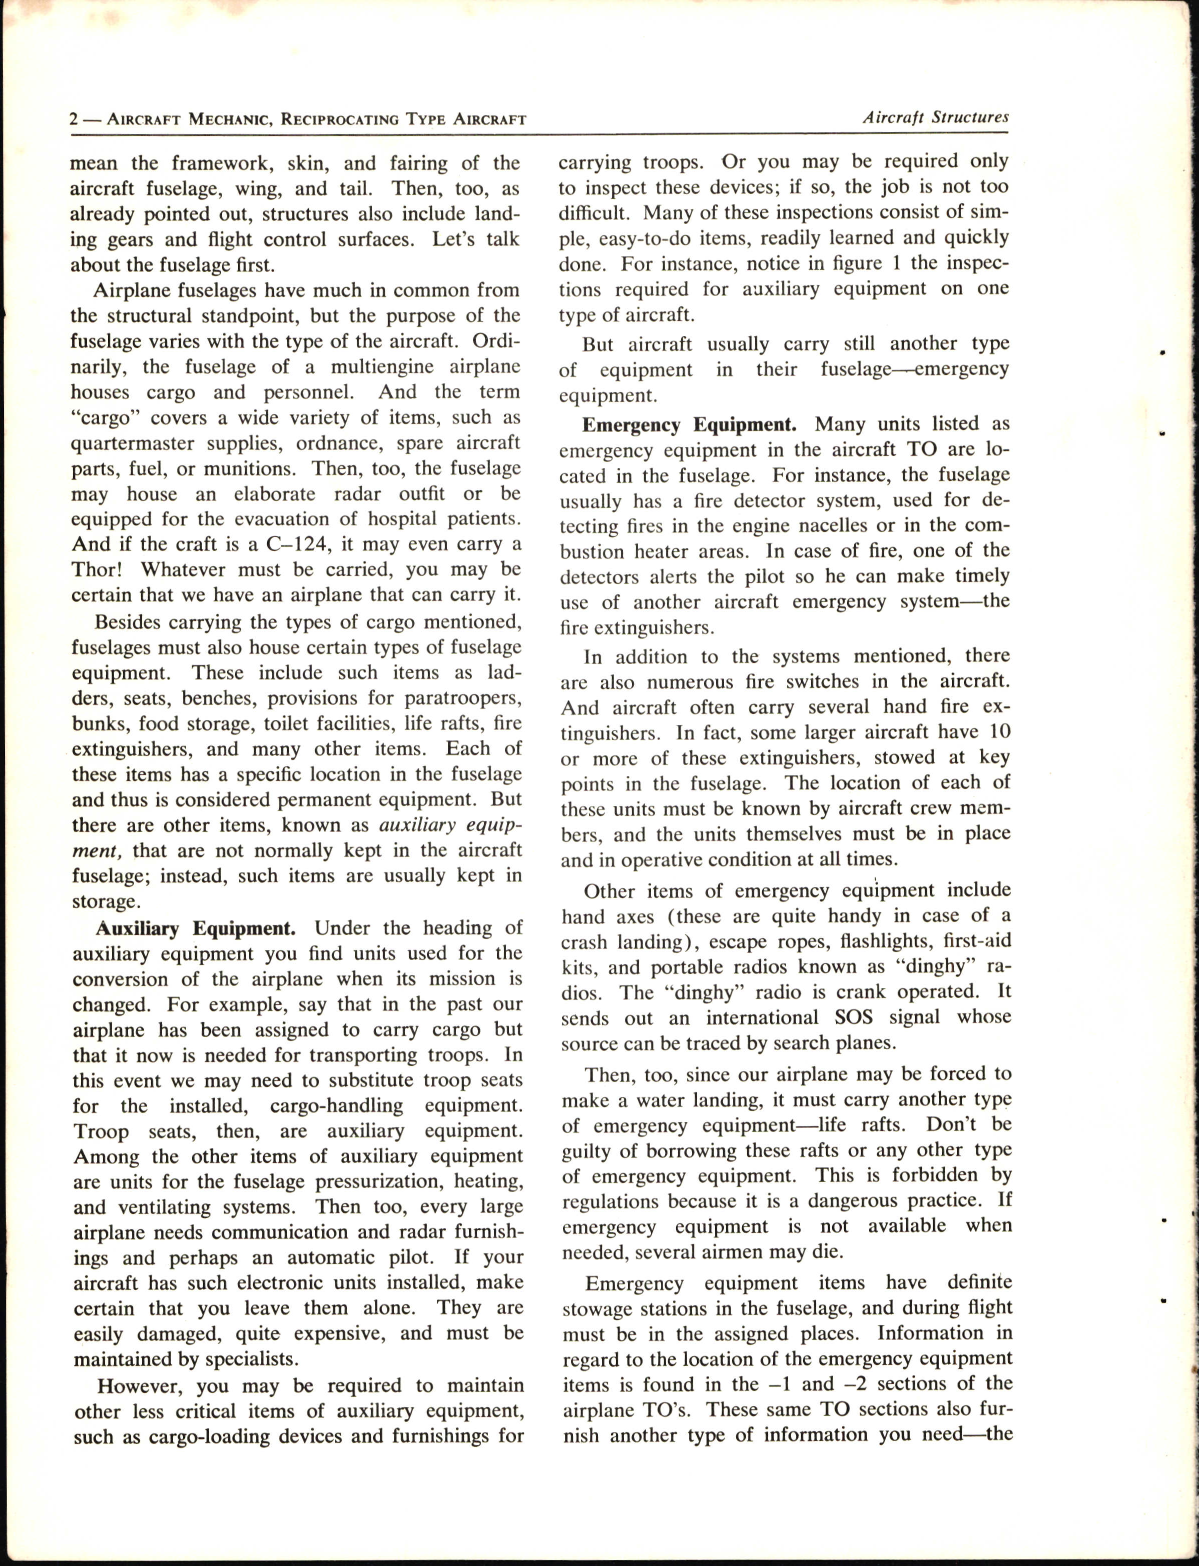 Sample page 6 from AirCorps Library document: Aircraft Mechanic, Reciprocating Type Aircraft